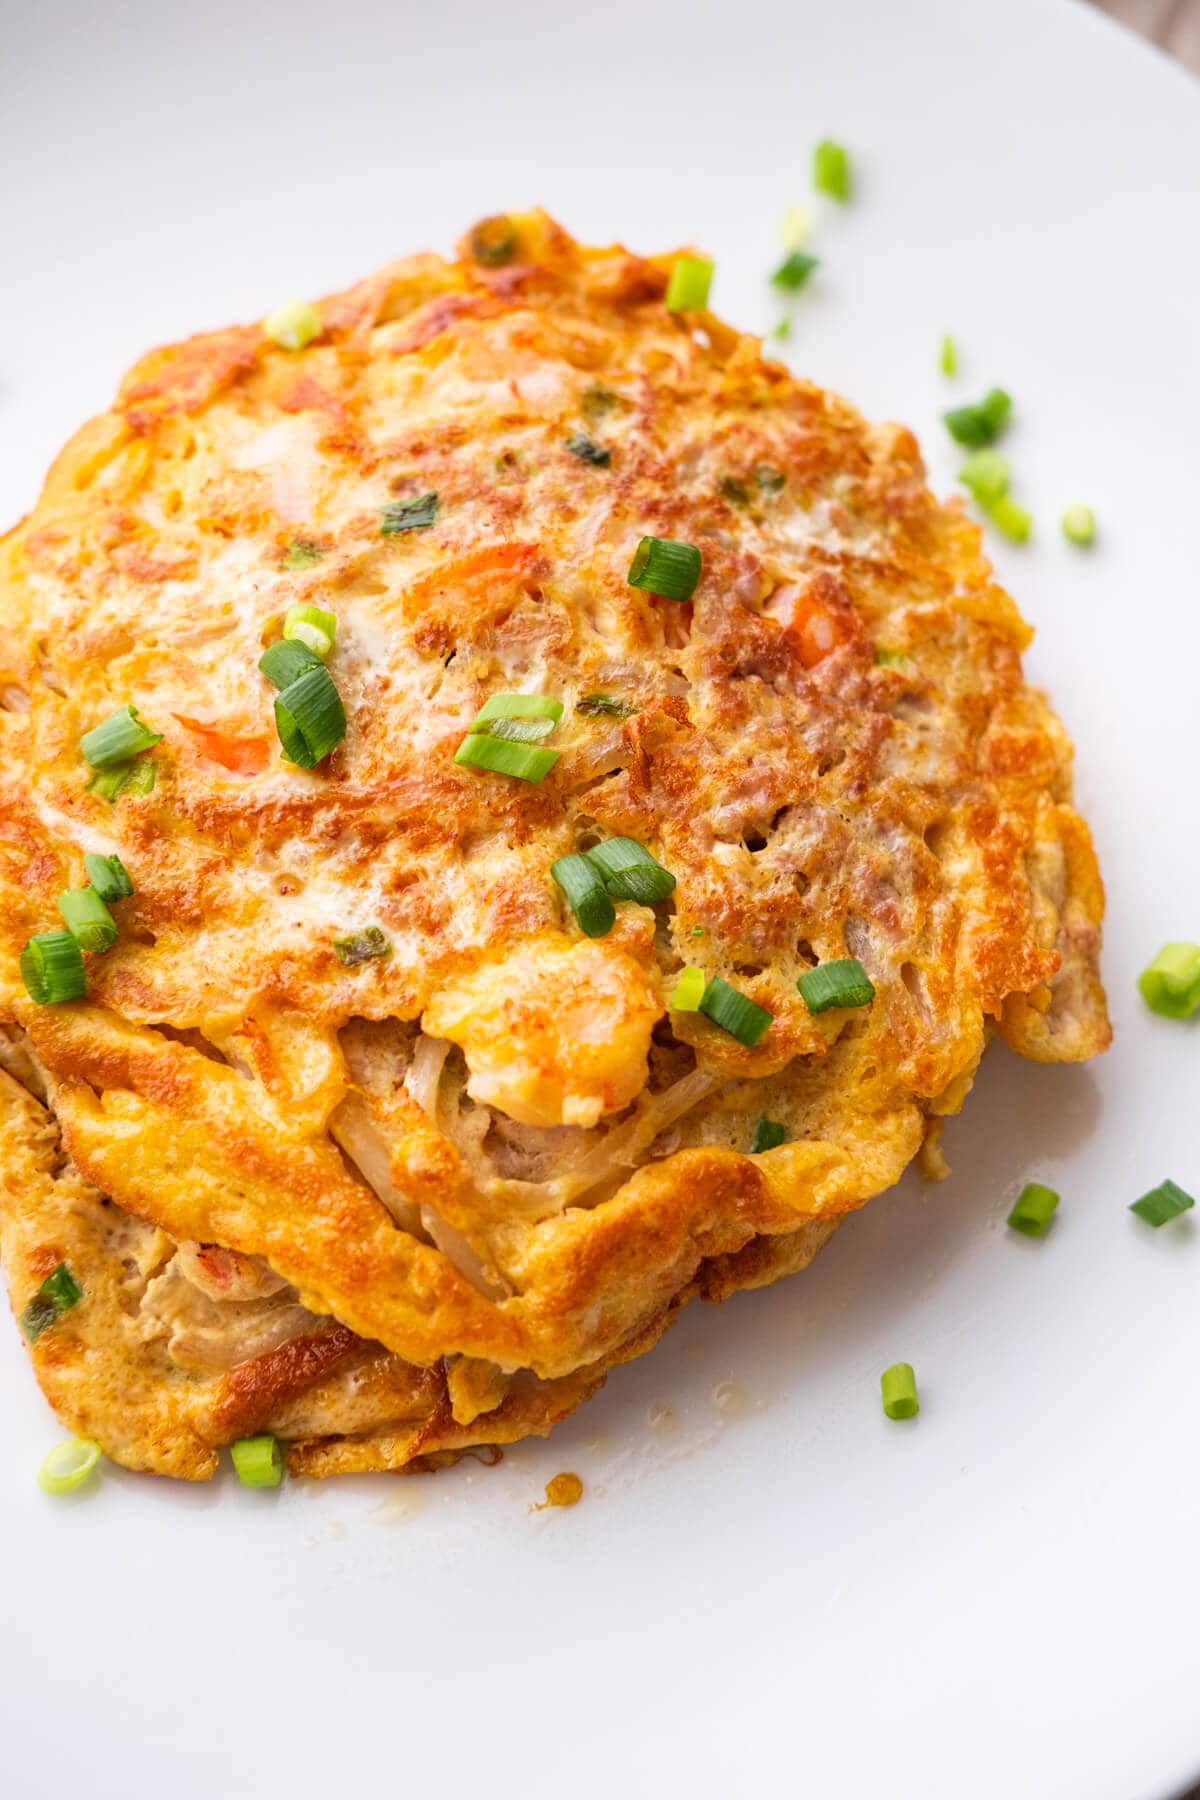 Egg foo young with pork and vegetable filling, a delicious Chinese omelet.